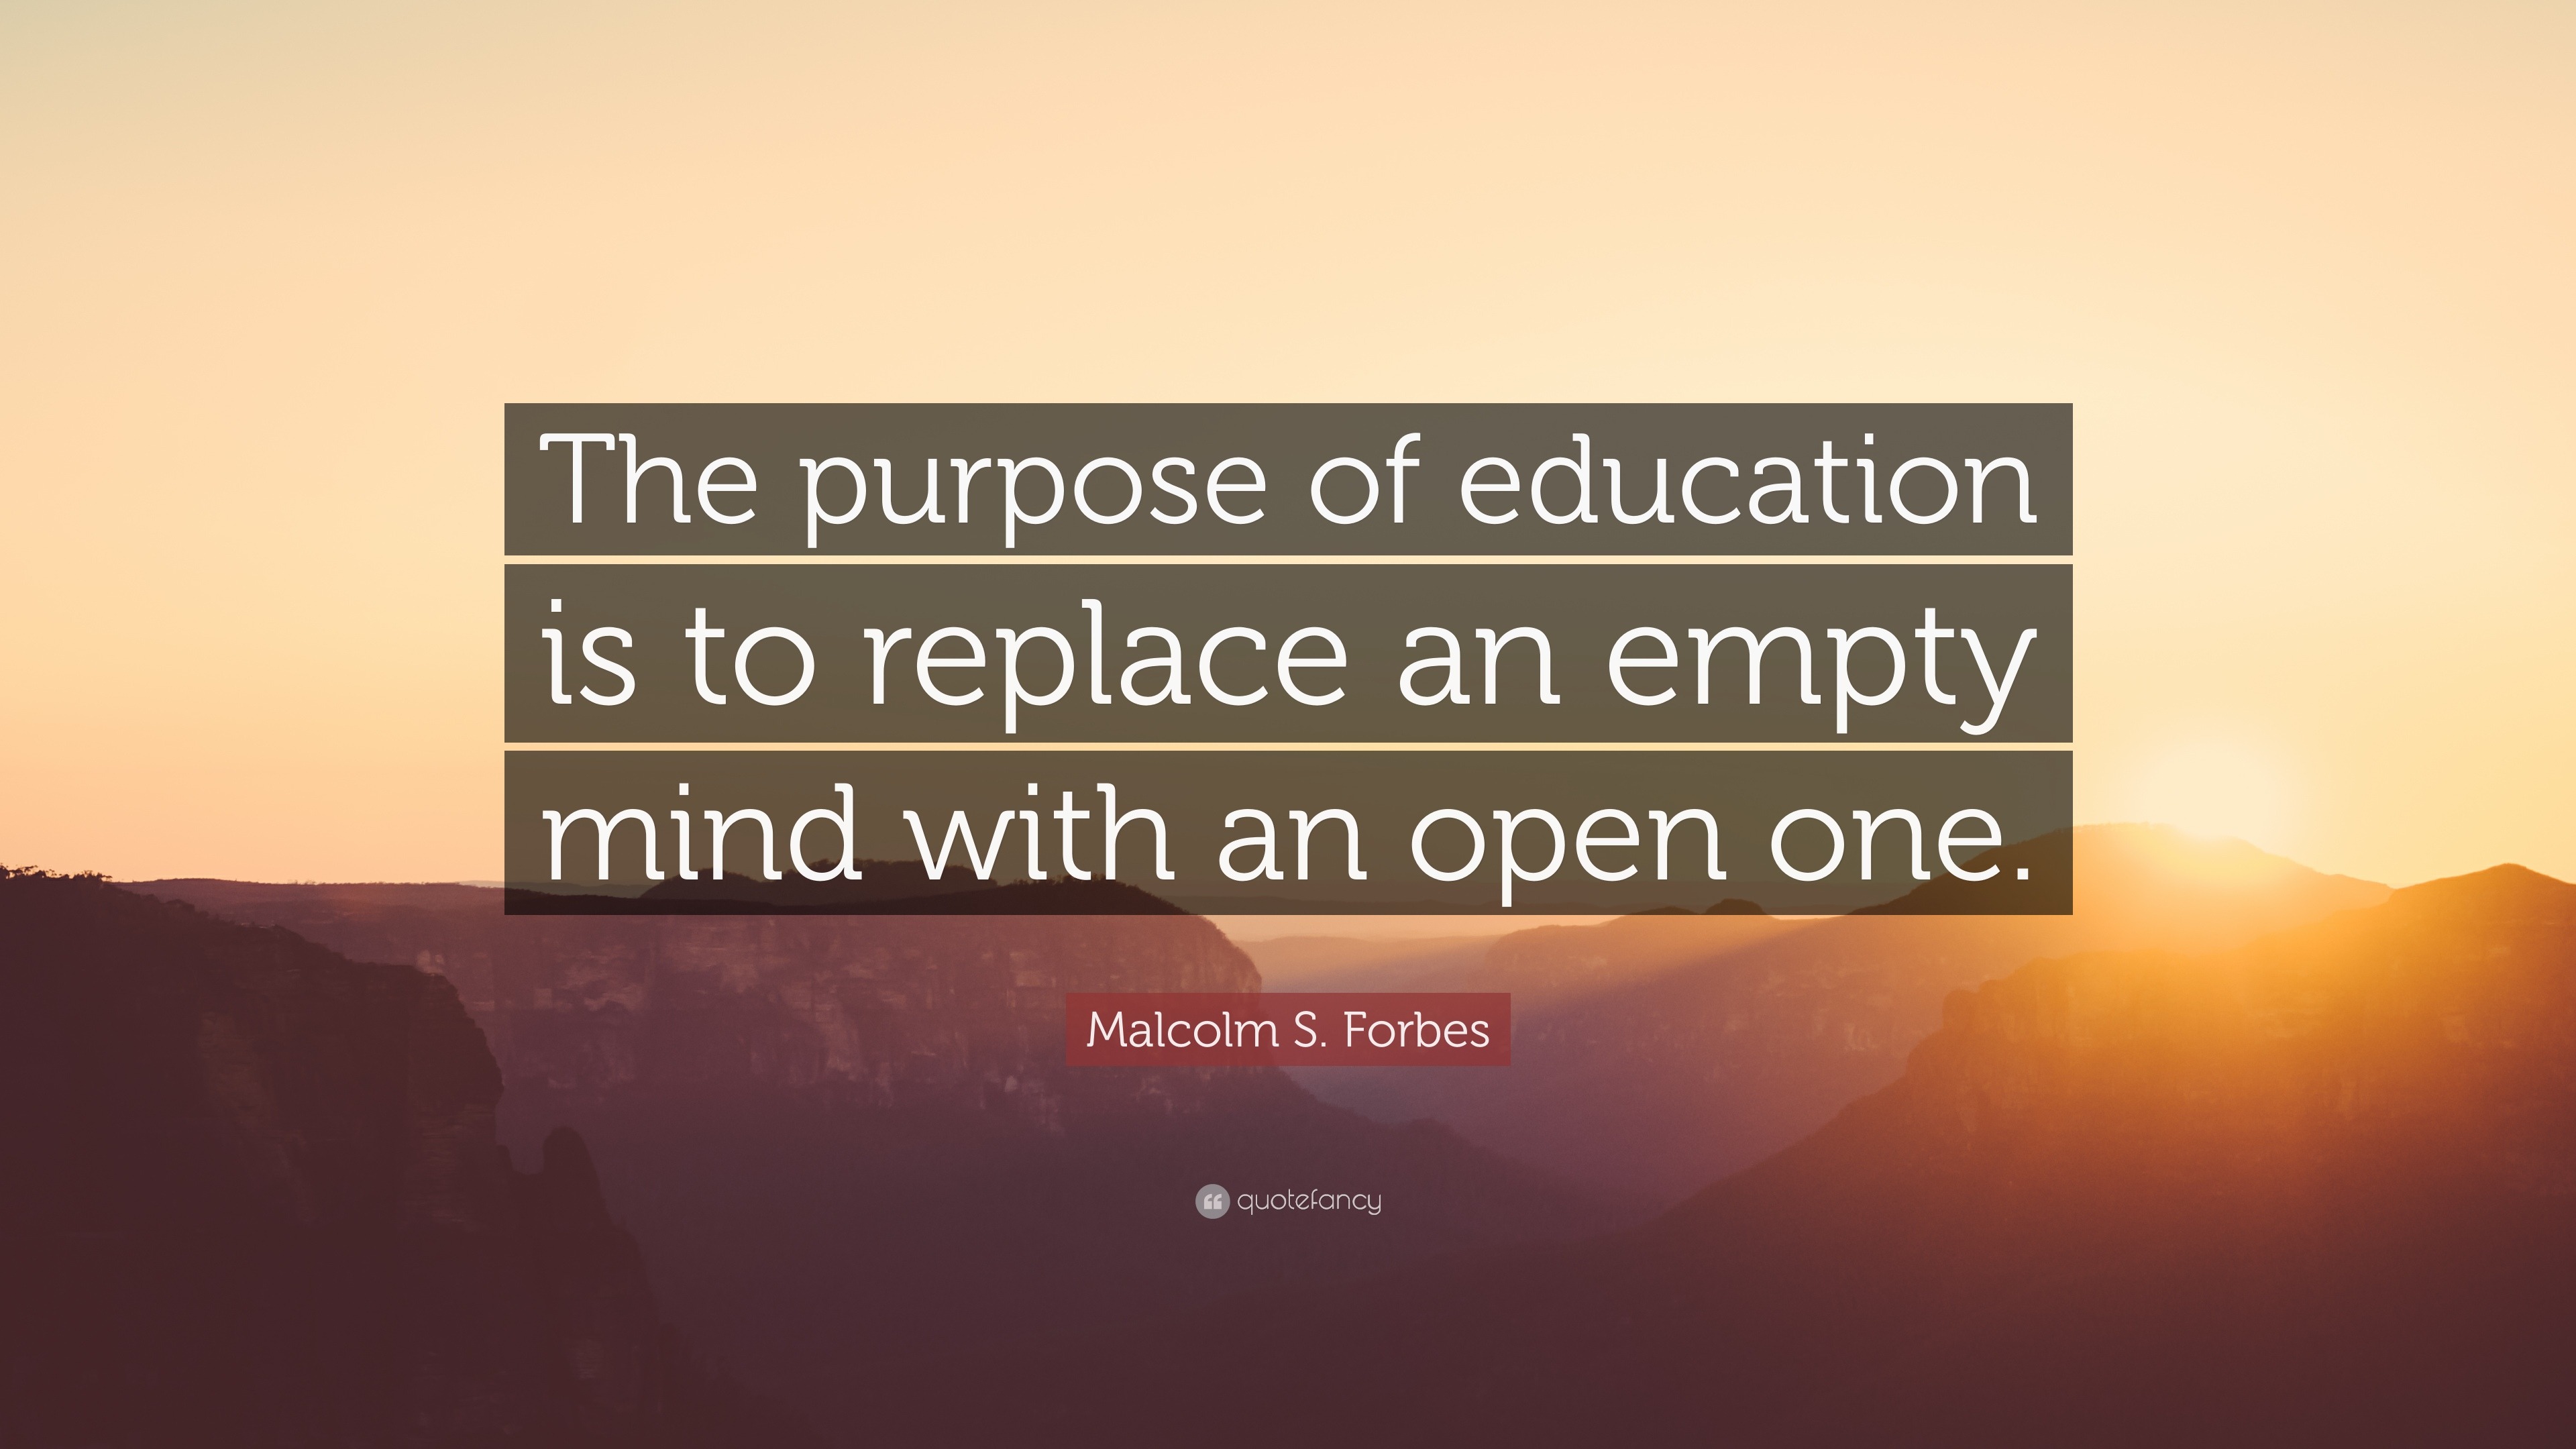 Malcolm S. Forbes Quote: “The purpose of education is to replace an ...